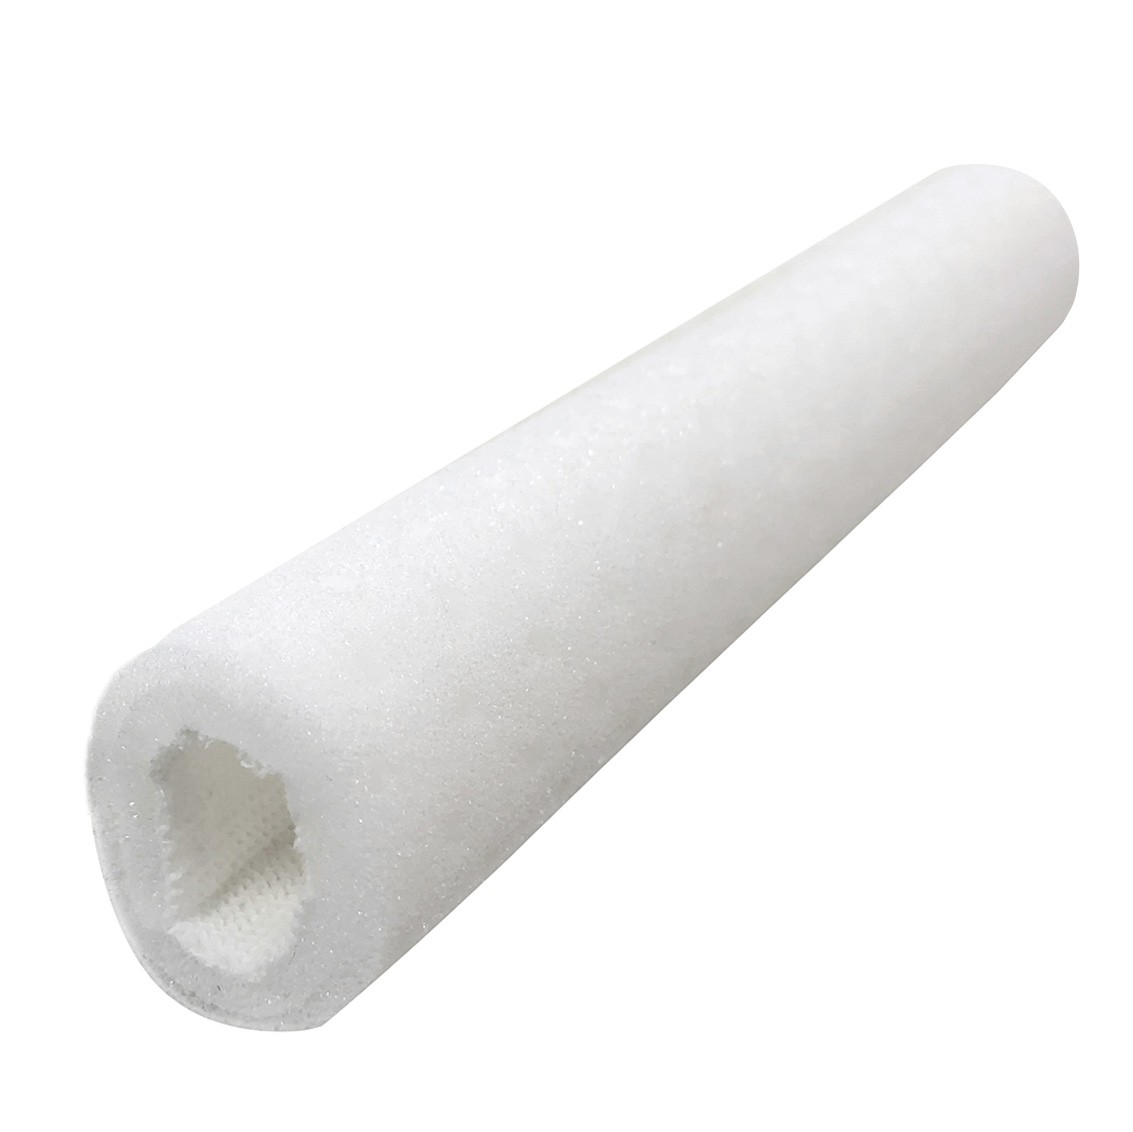 Double-layer perforated tubular protection Tubifoam T-Air Foam 25 mm 8 pcs